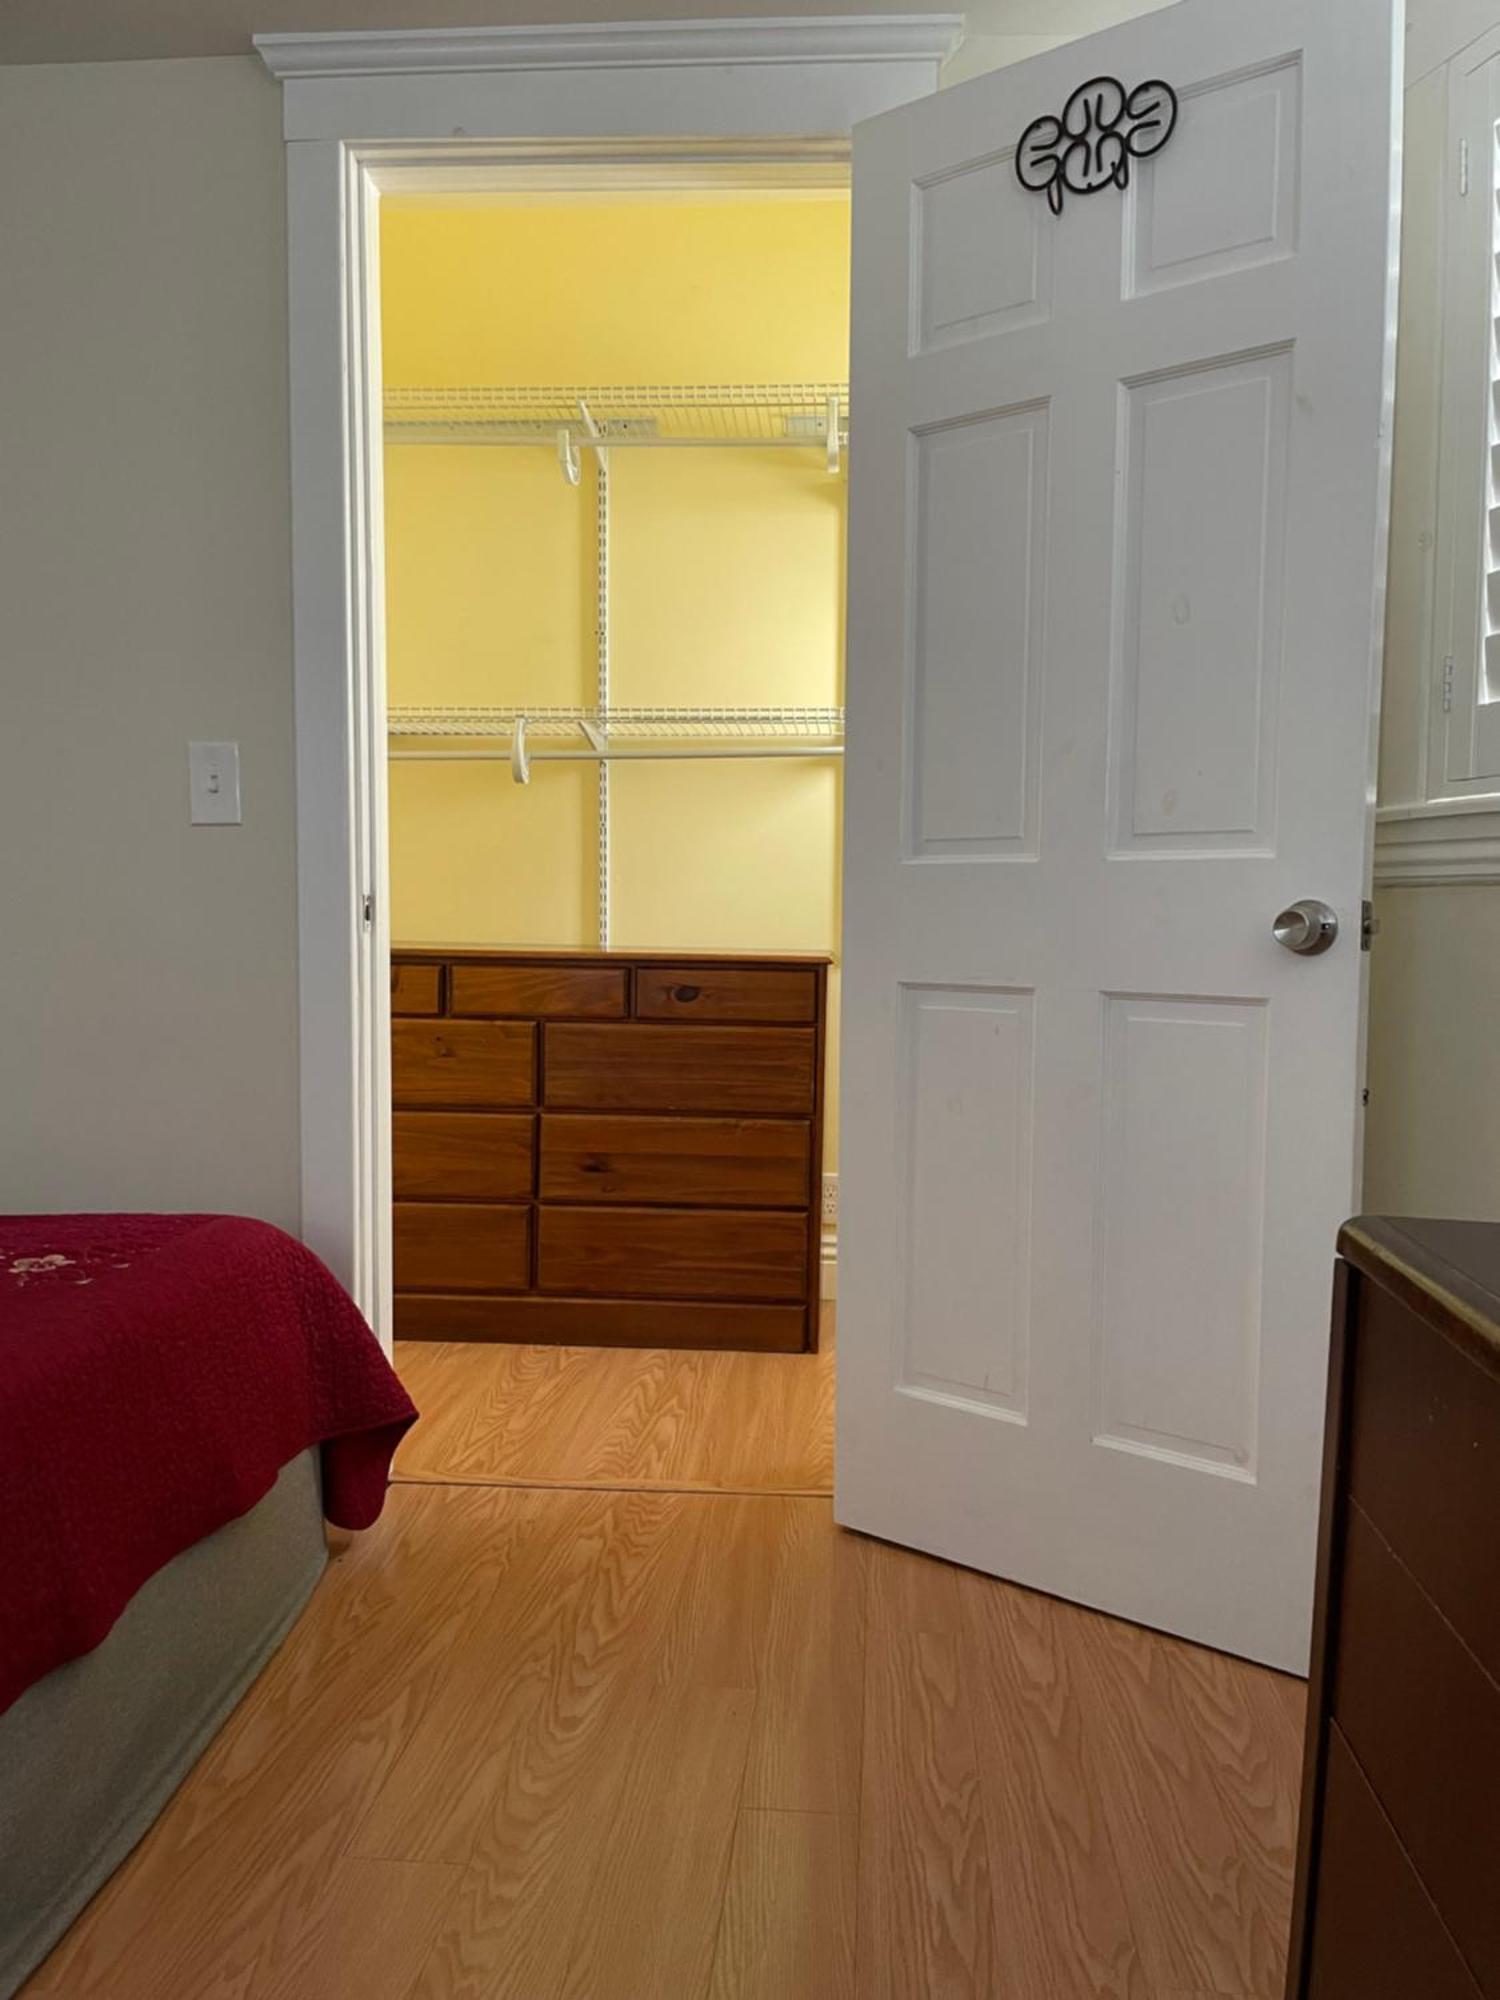 Spacious Private Los Angeles Bedroom With Ac & Wifi & Private Fridge Near Usc The Coliseum Exposition Park Bmo Stadium University Of Southern California Bagian luar foto